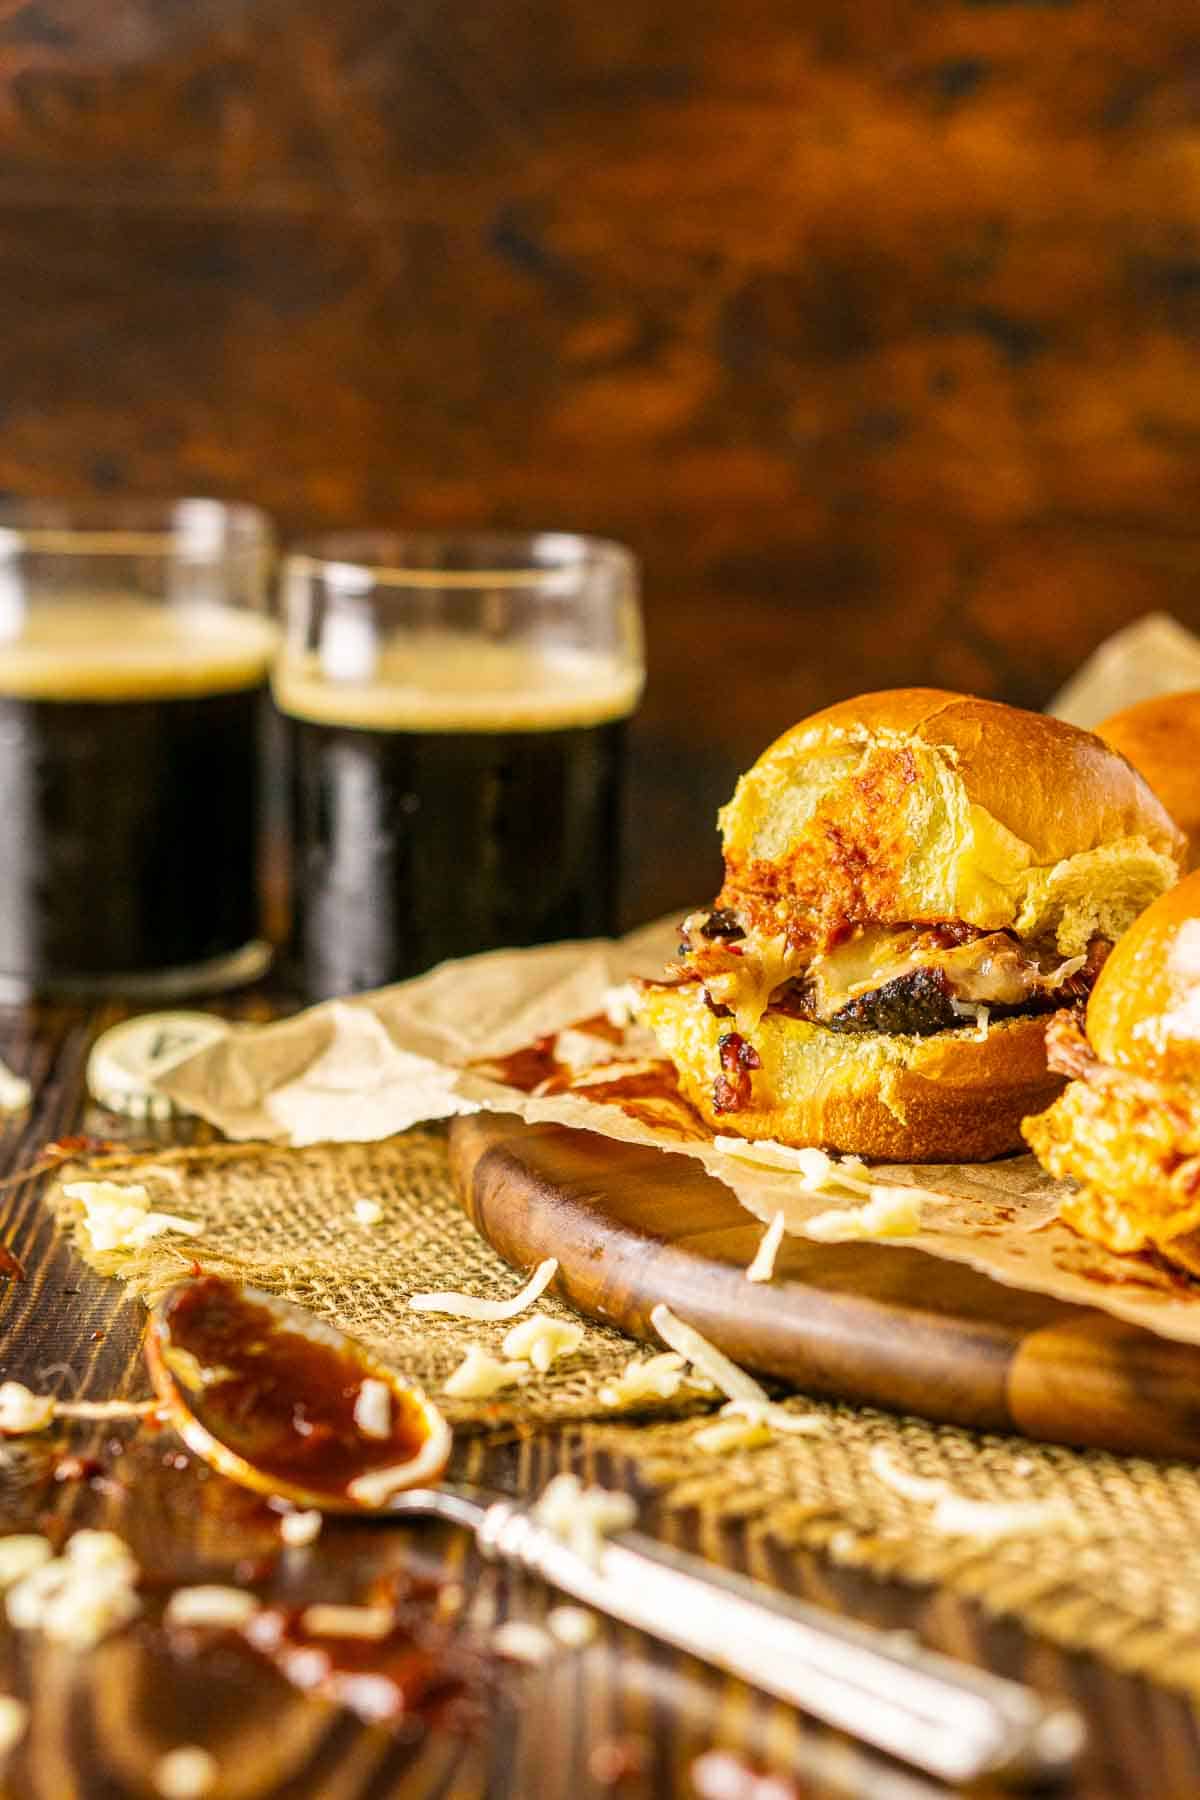 A close-up of the brisket sliders against a wooden background with two beers to the left and smears of BBQ sauce in front.